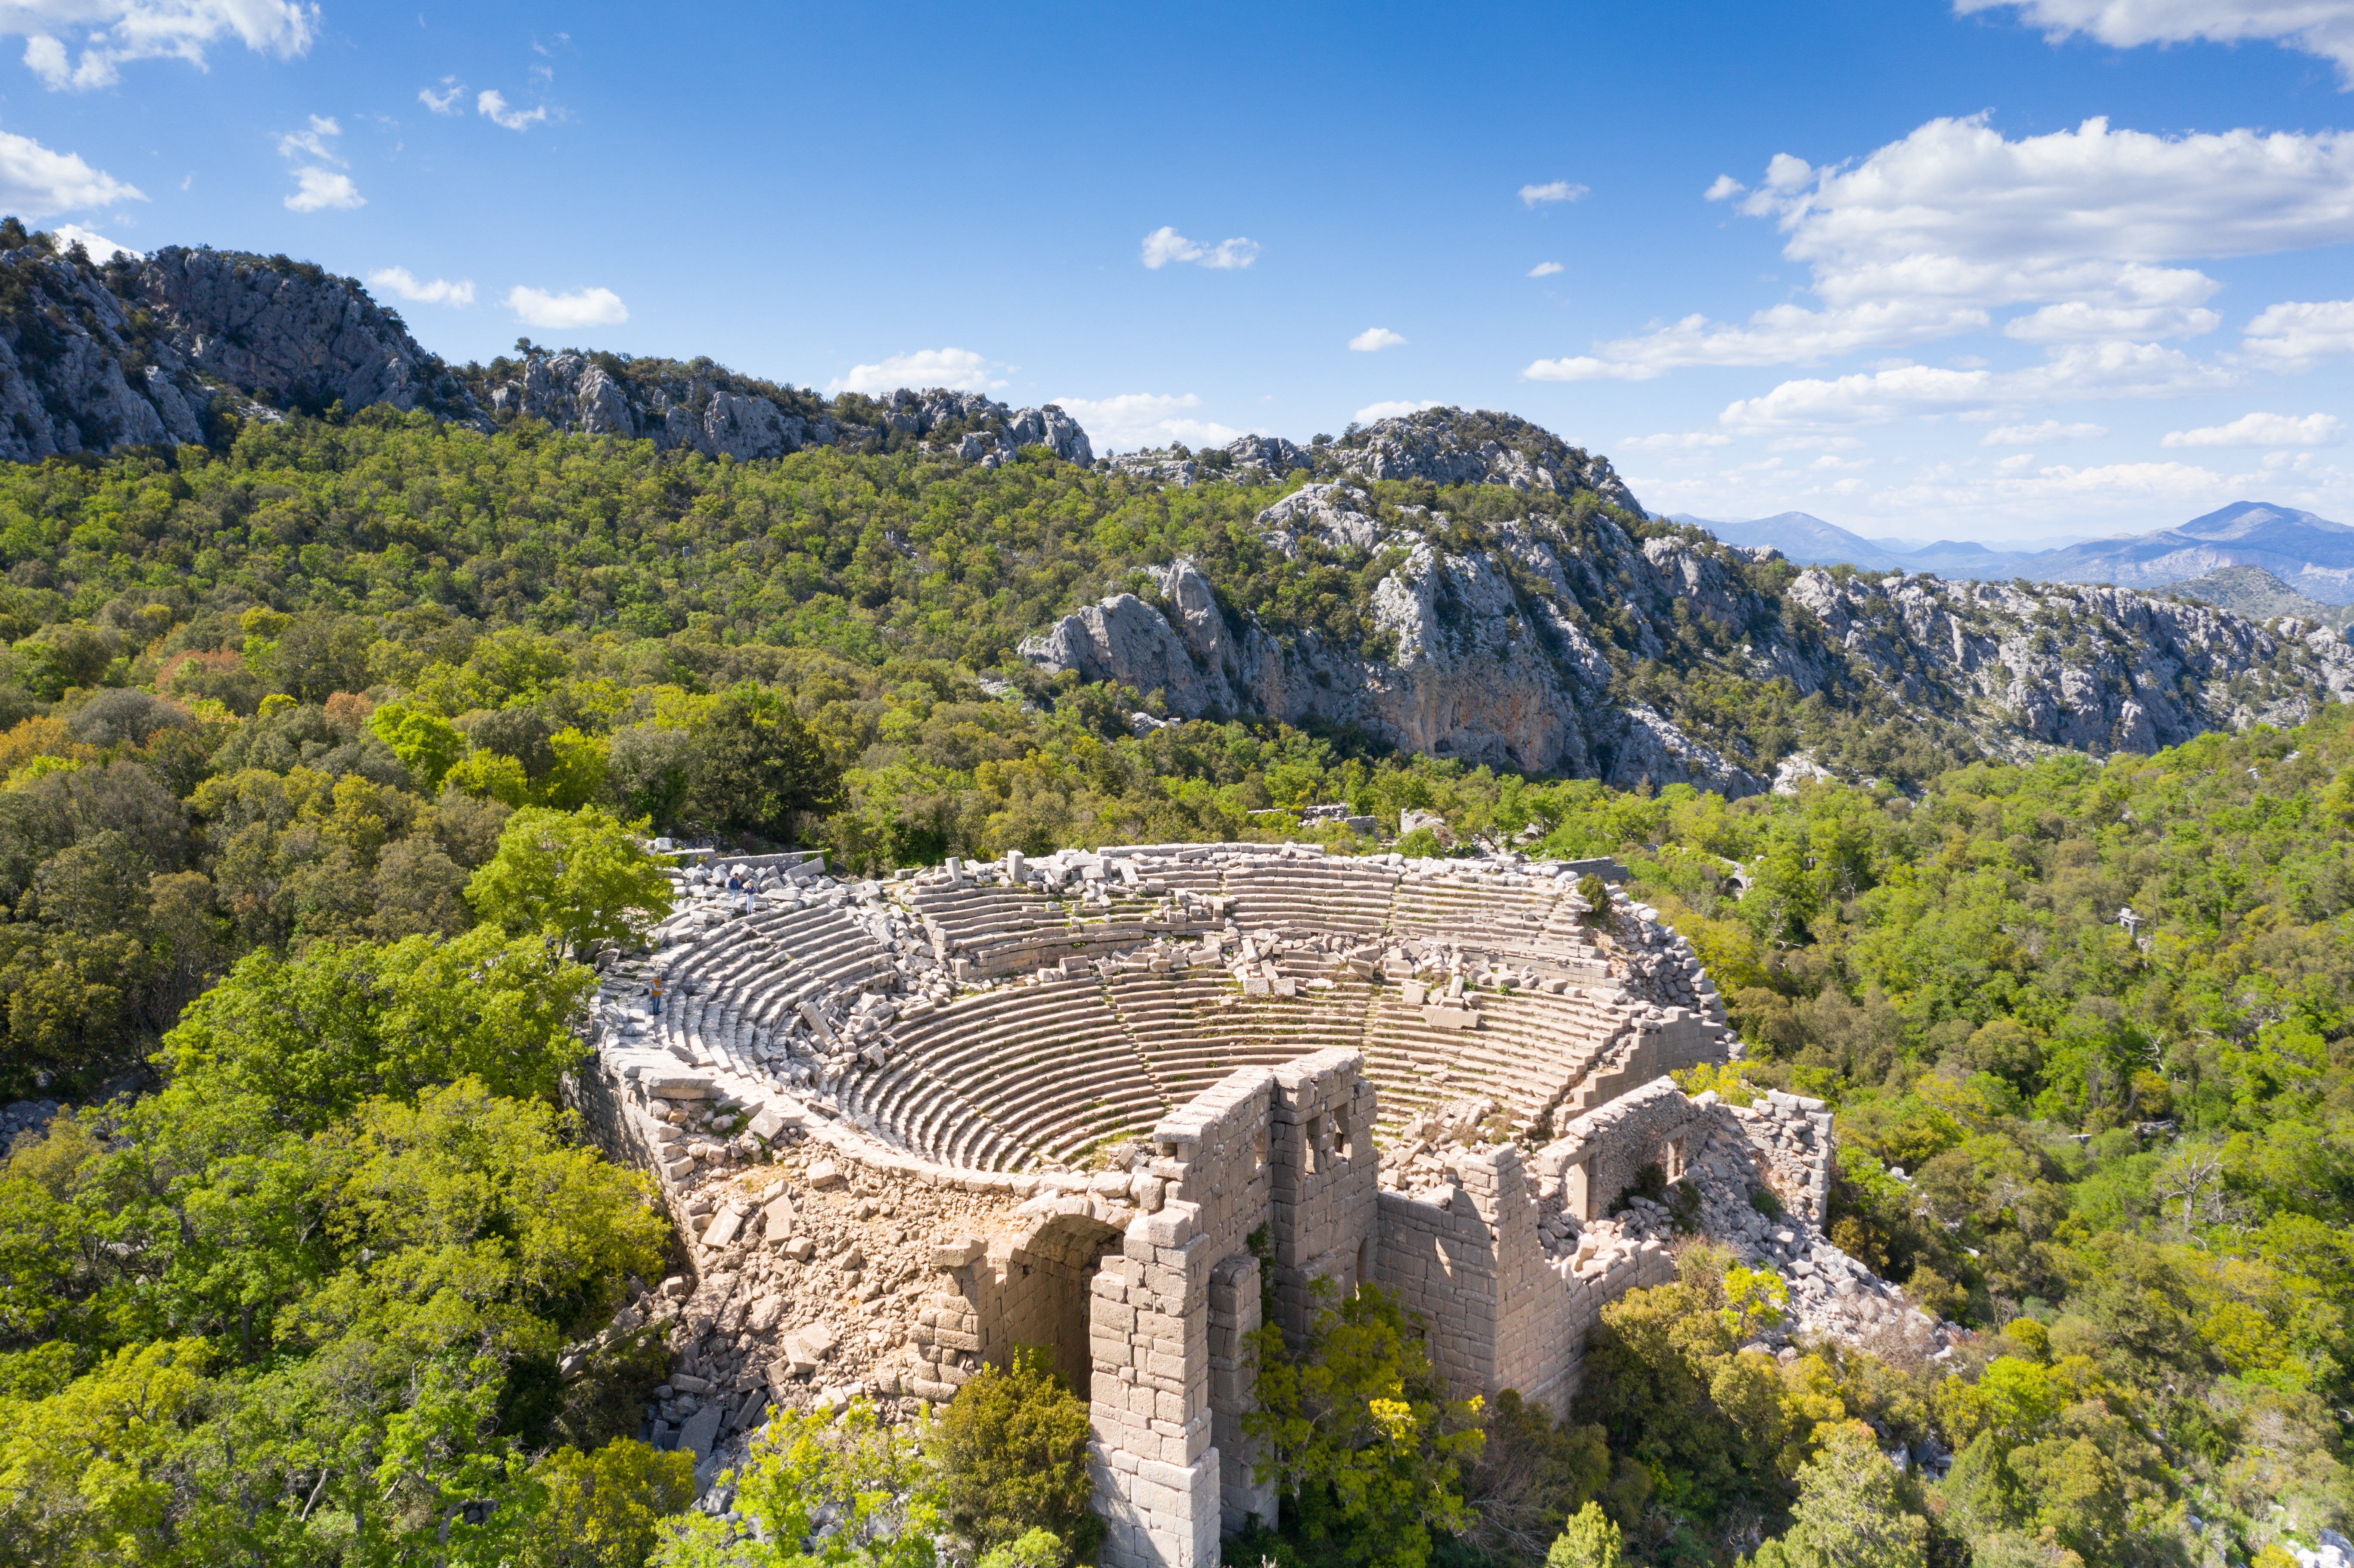 The ancient city of Termessos is beautifully preserved